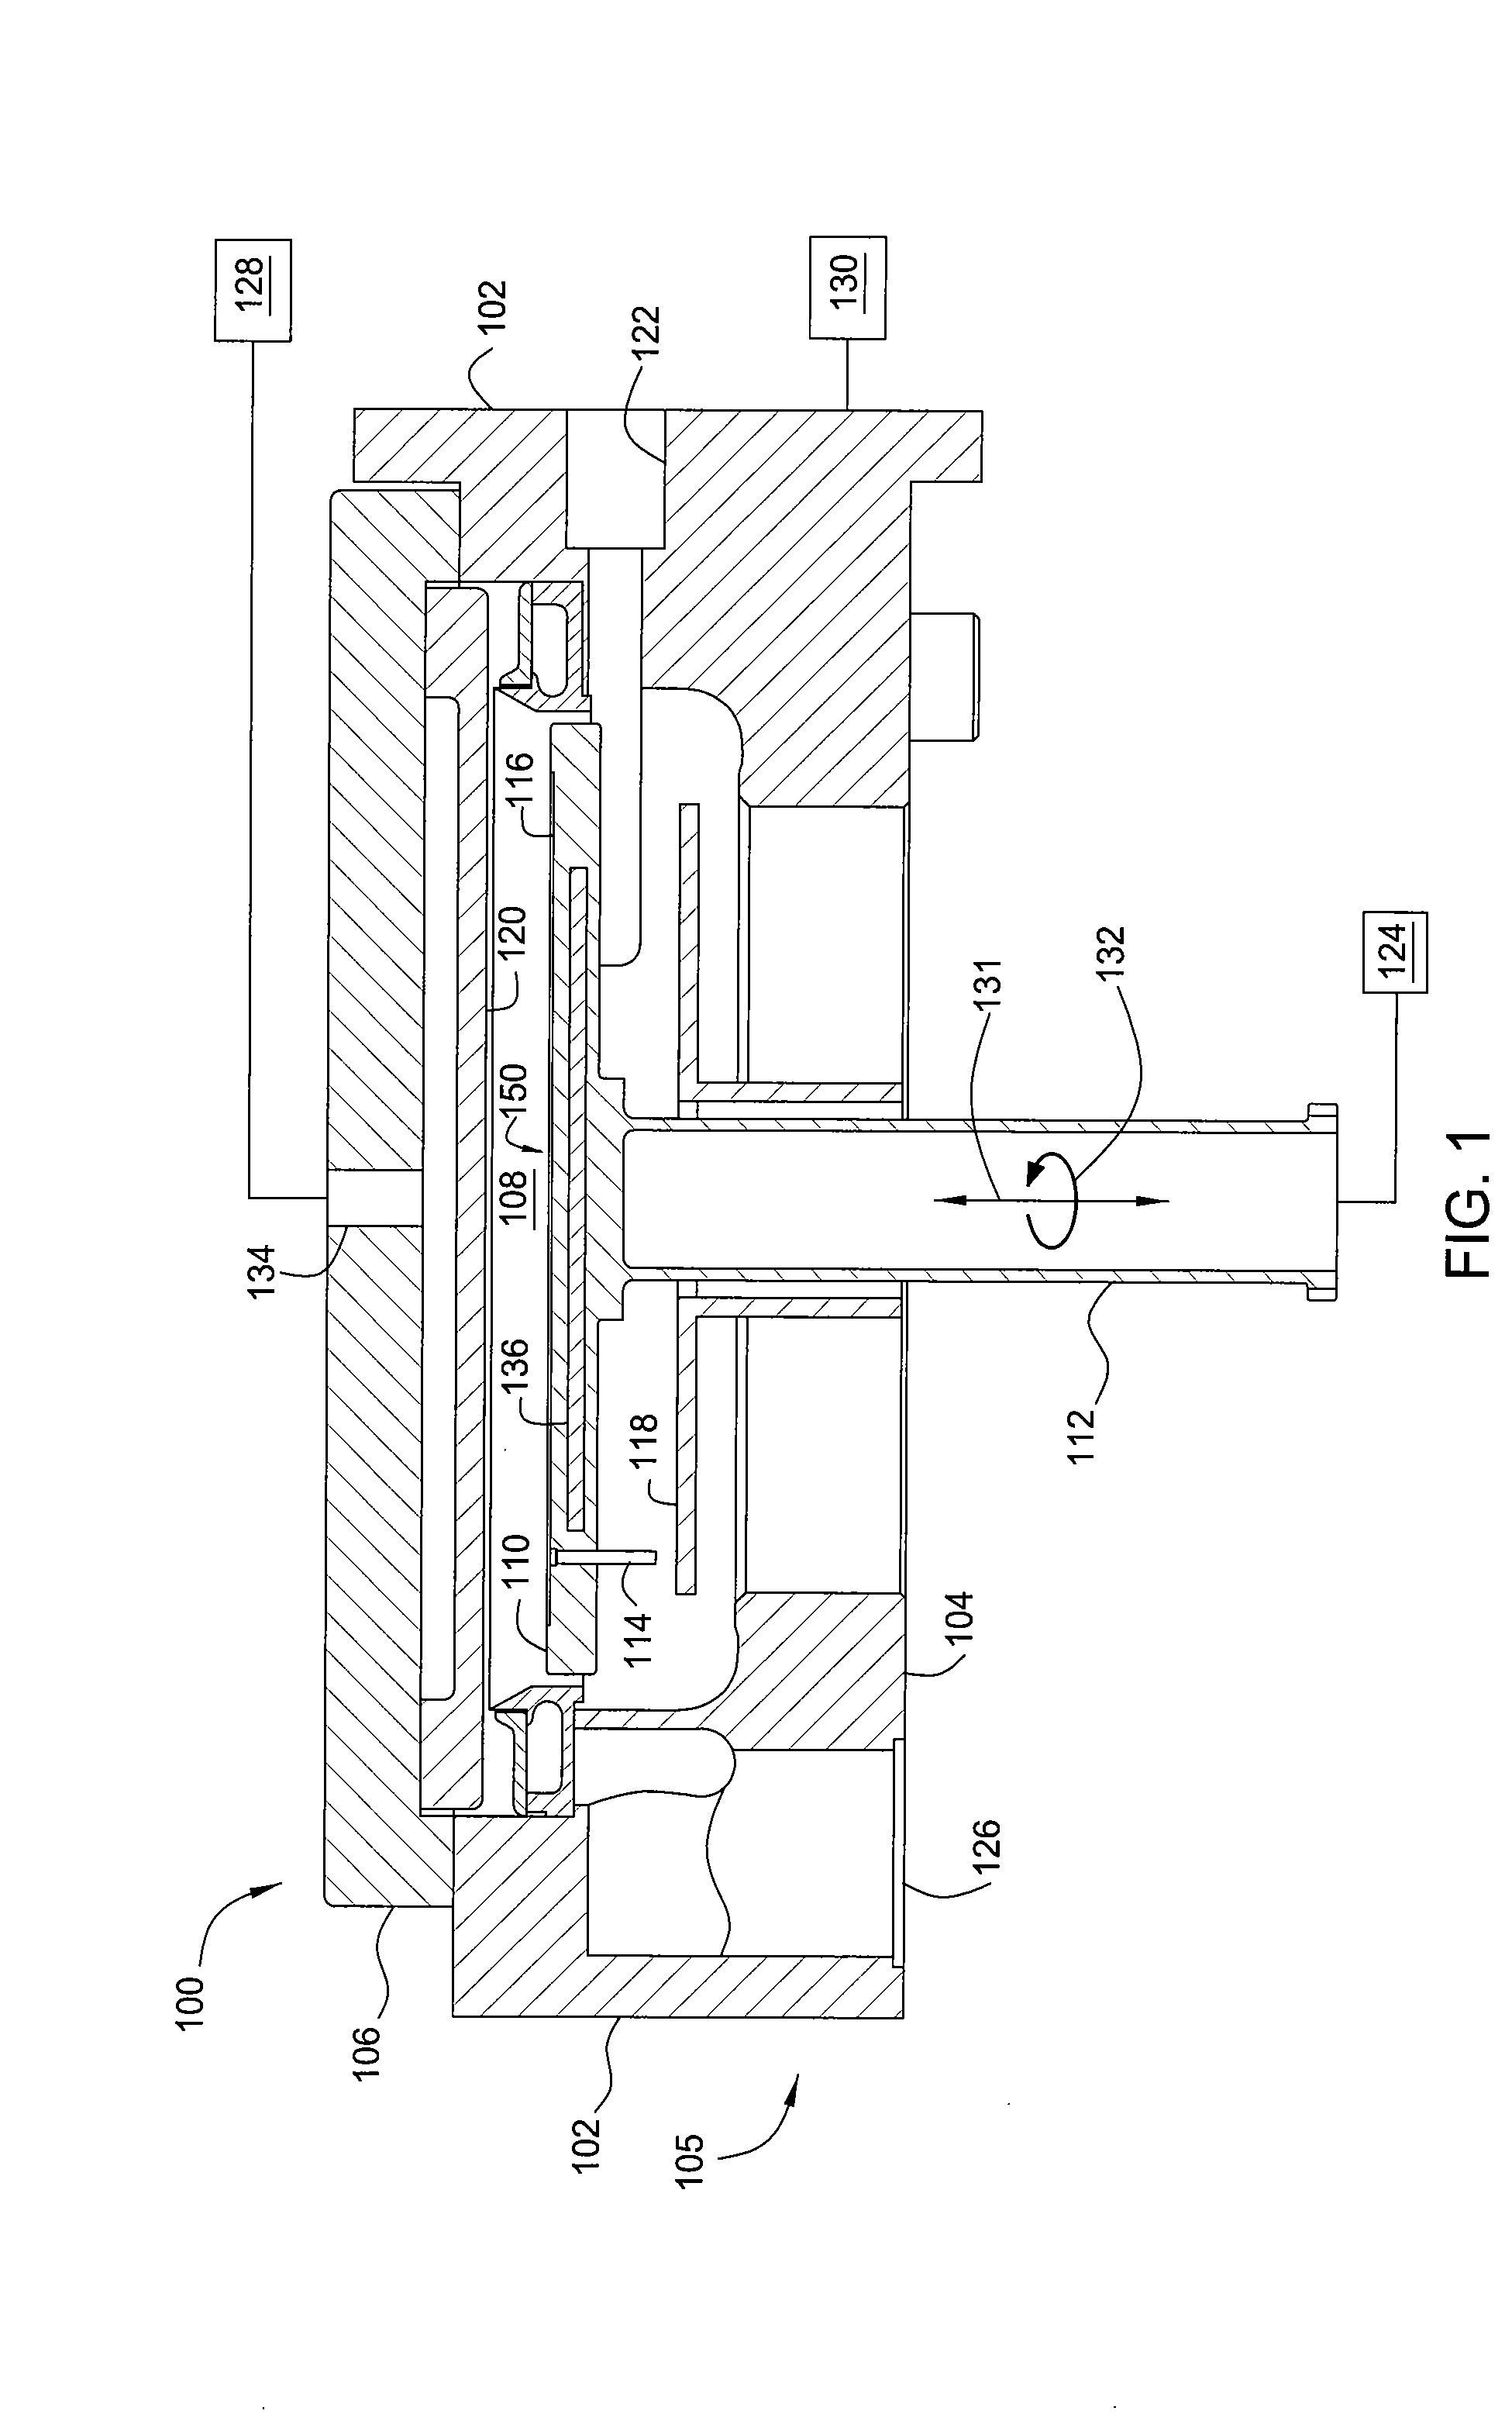 Rotating substrate support and methods of use